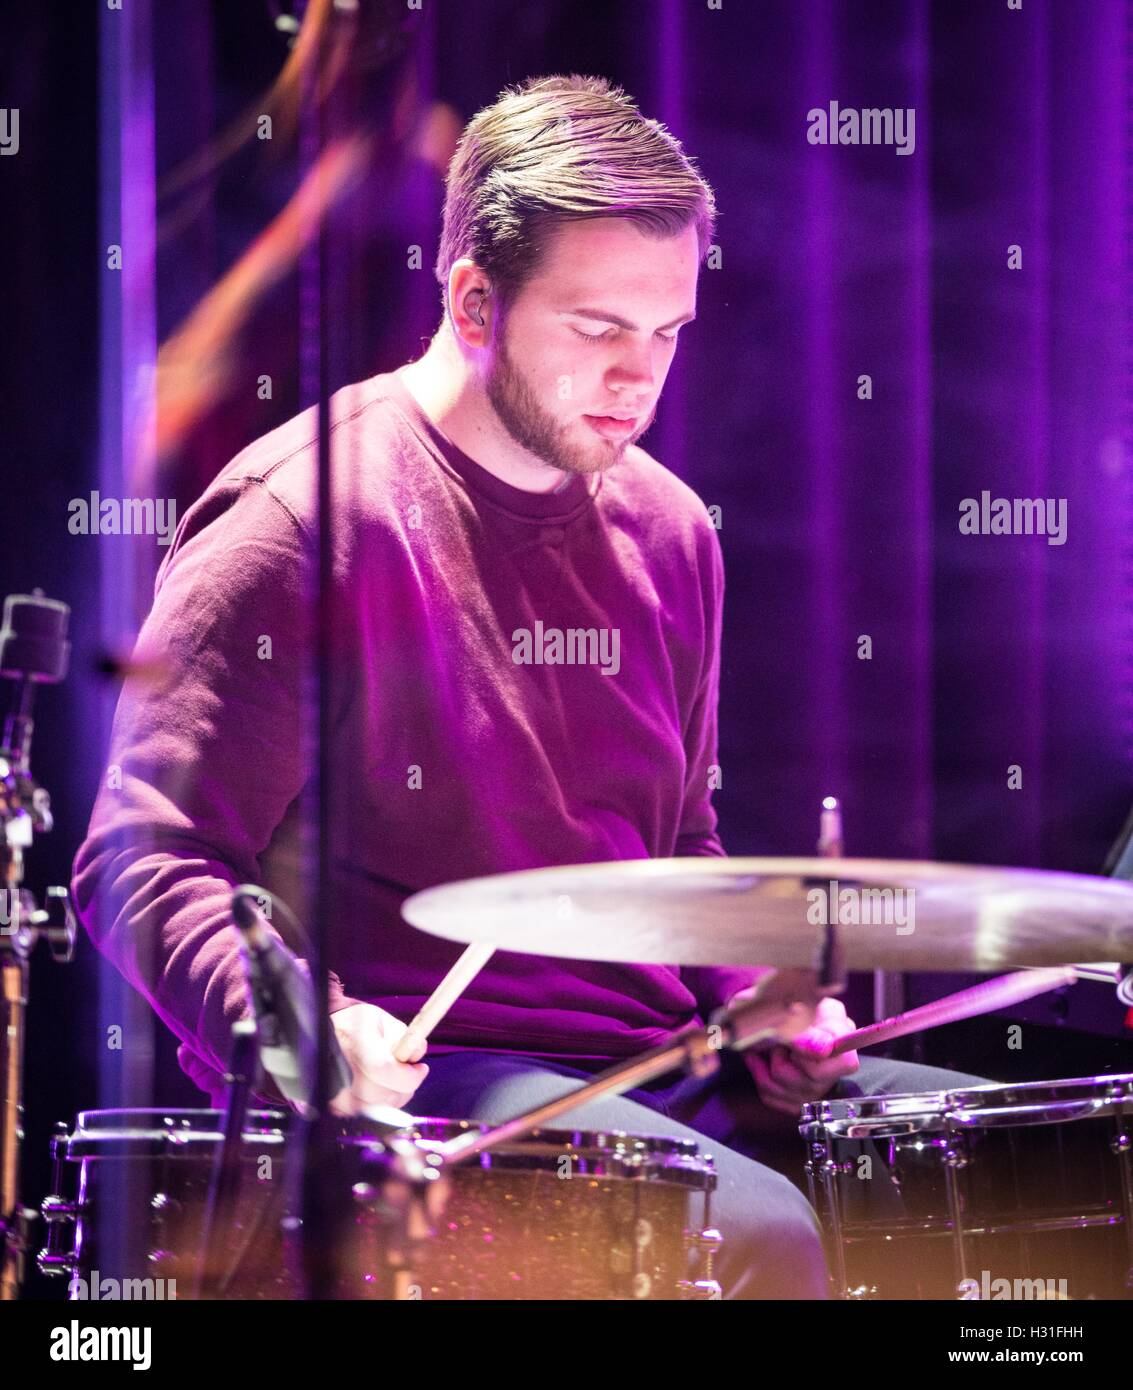 a drummer on stage with his eyes closed playing to the music with light shining all around. Stock Photo